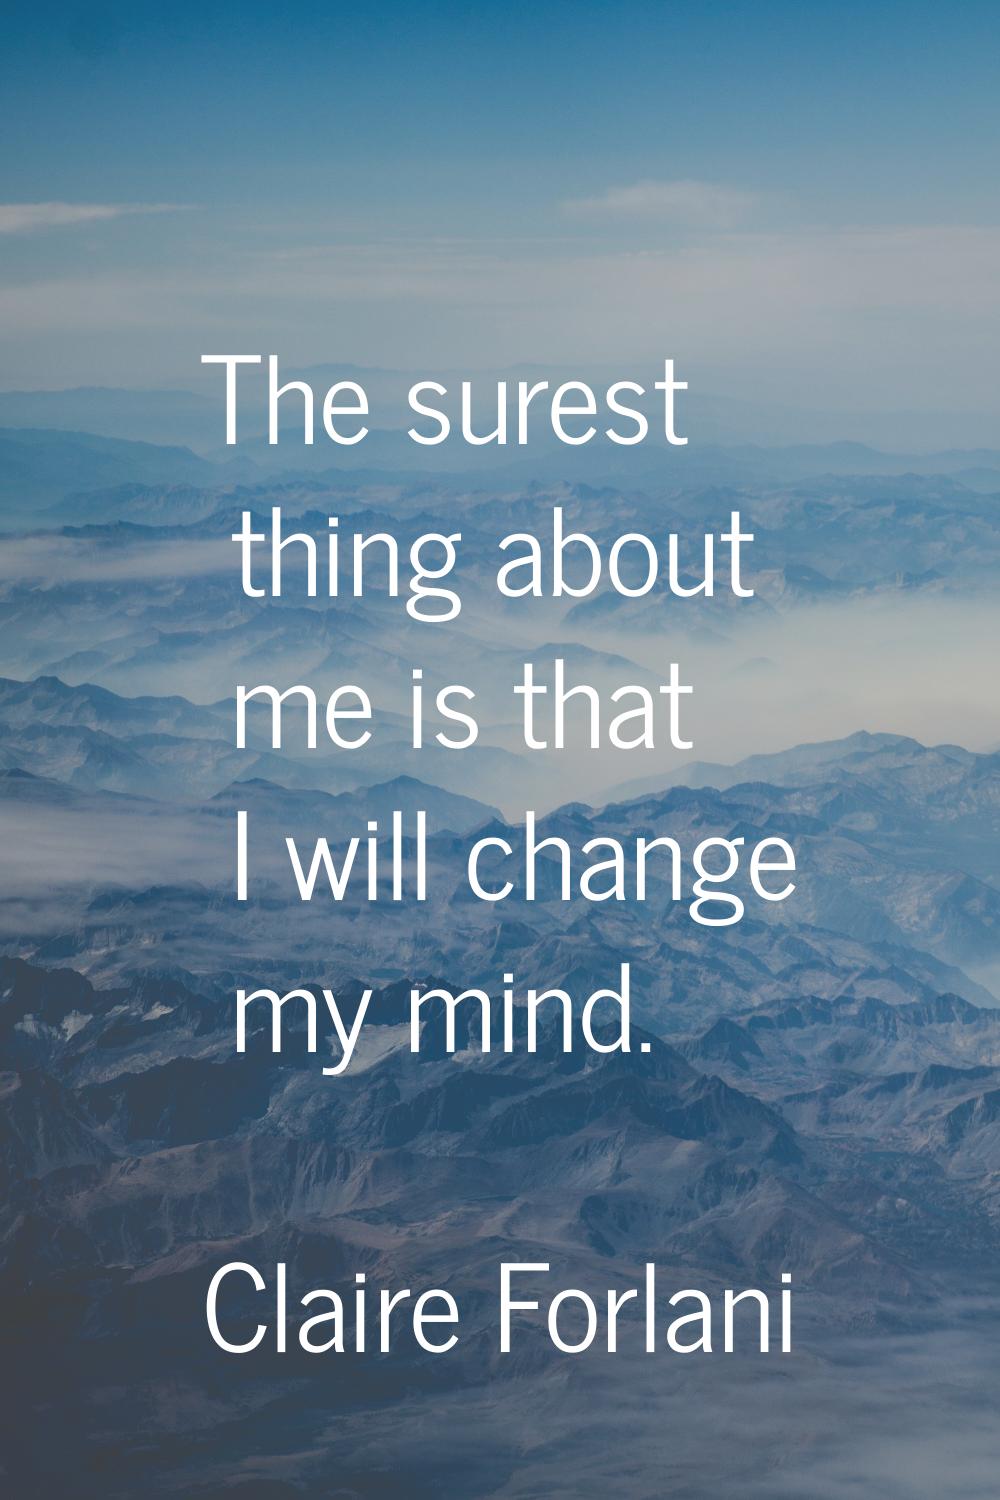 The surest thing about me is that I will change my mind.